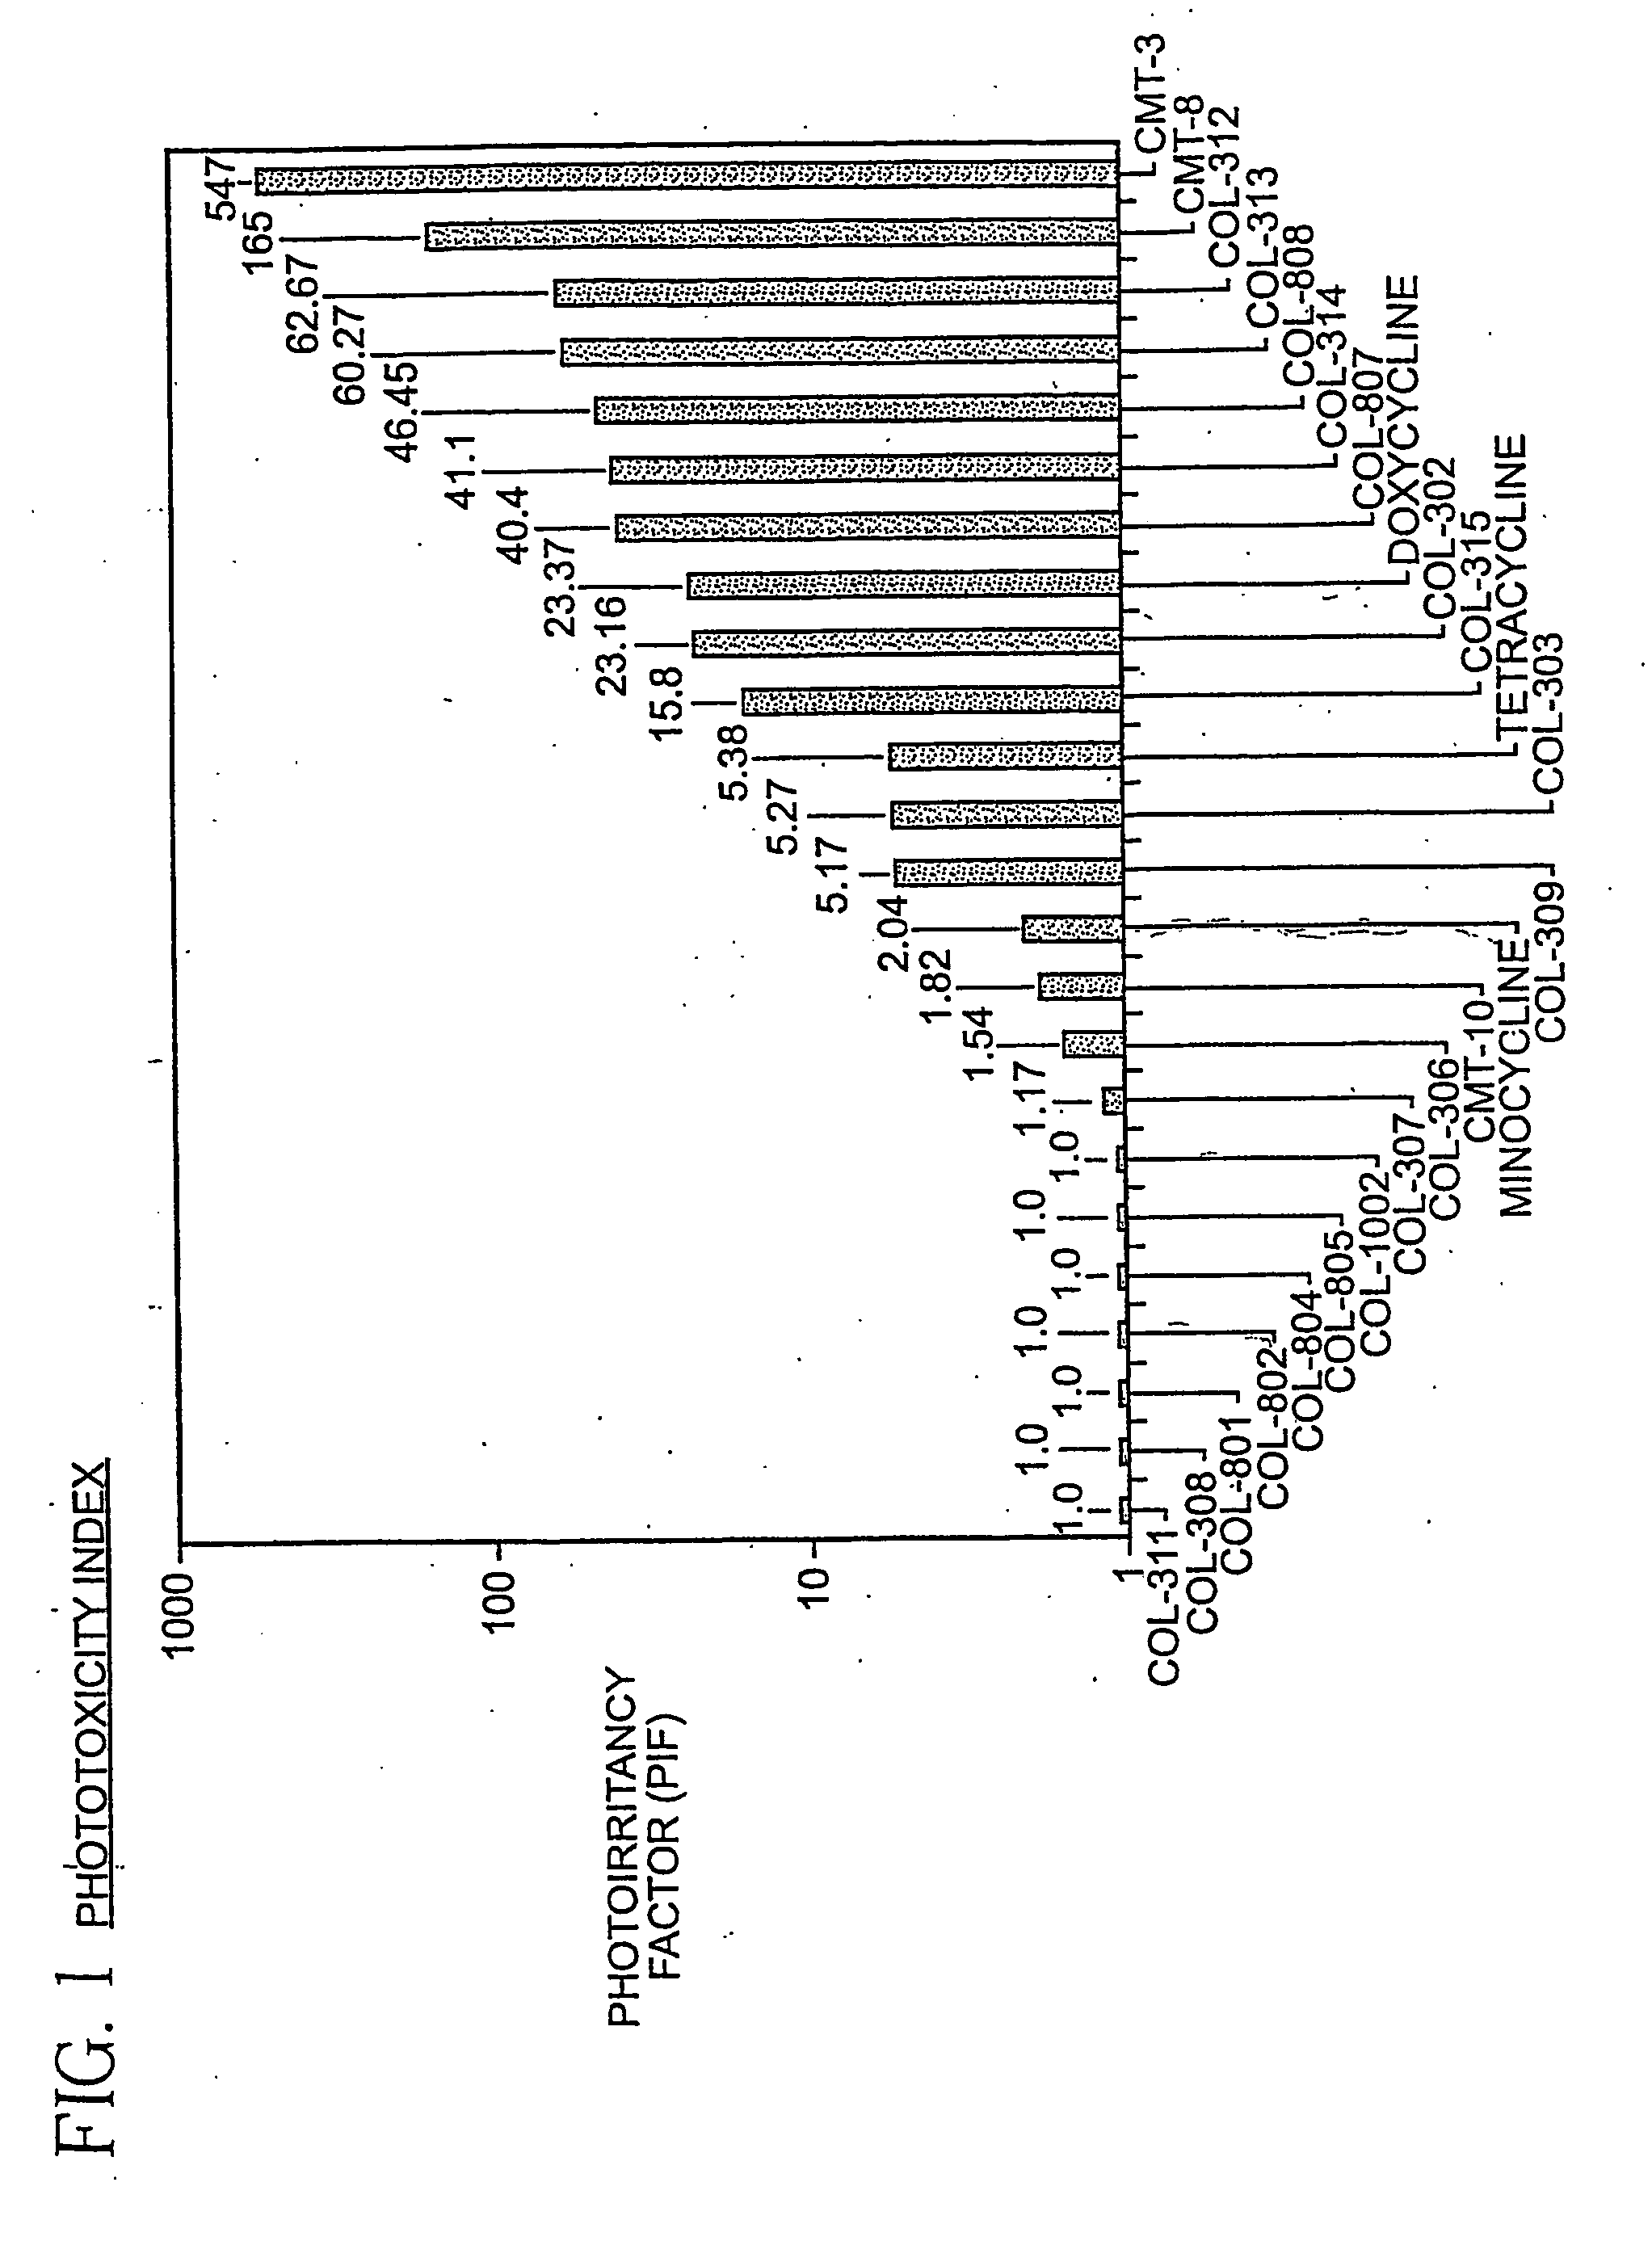 Methods of simultaneously treating mucositis and fungal infection